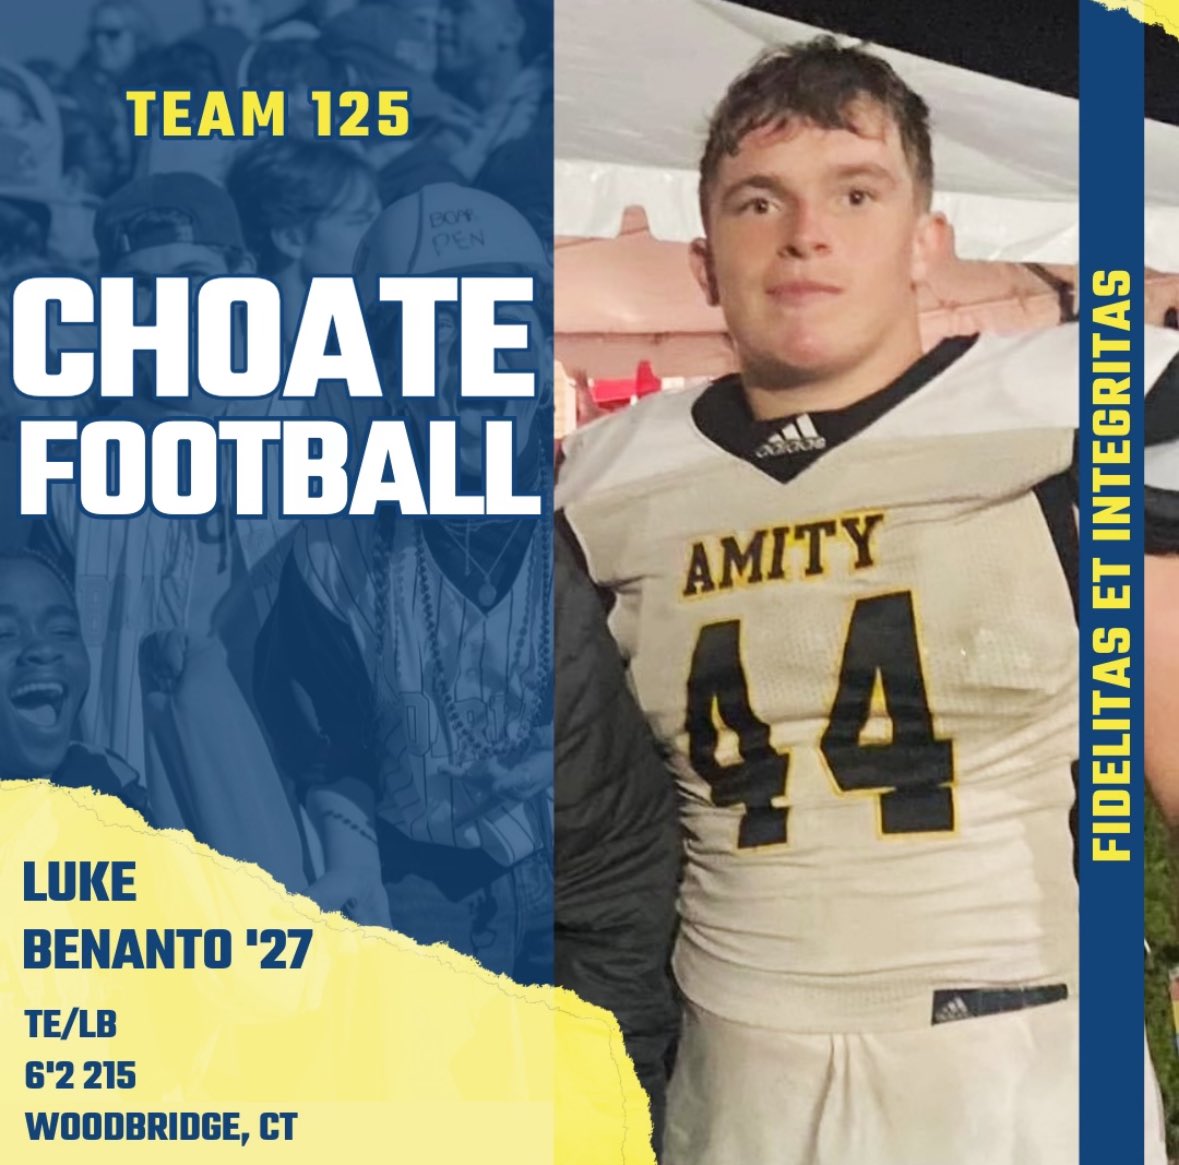 Beyond humbled to announce I will be attending Choate Rosemary Hall. Thank you to everyone who’s helped me along the way. #Crankit #FAMILY @coach_spinnato